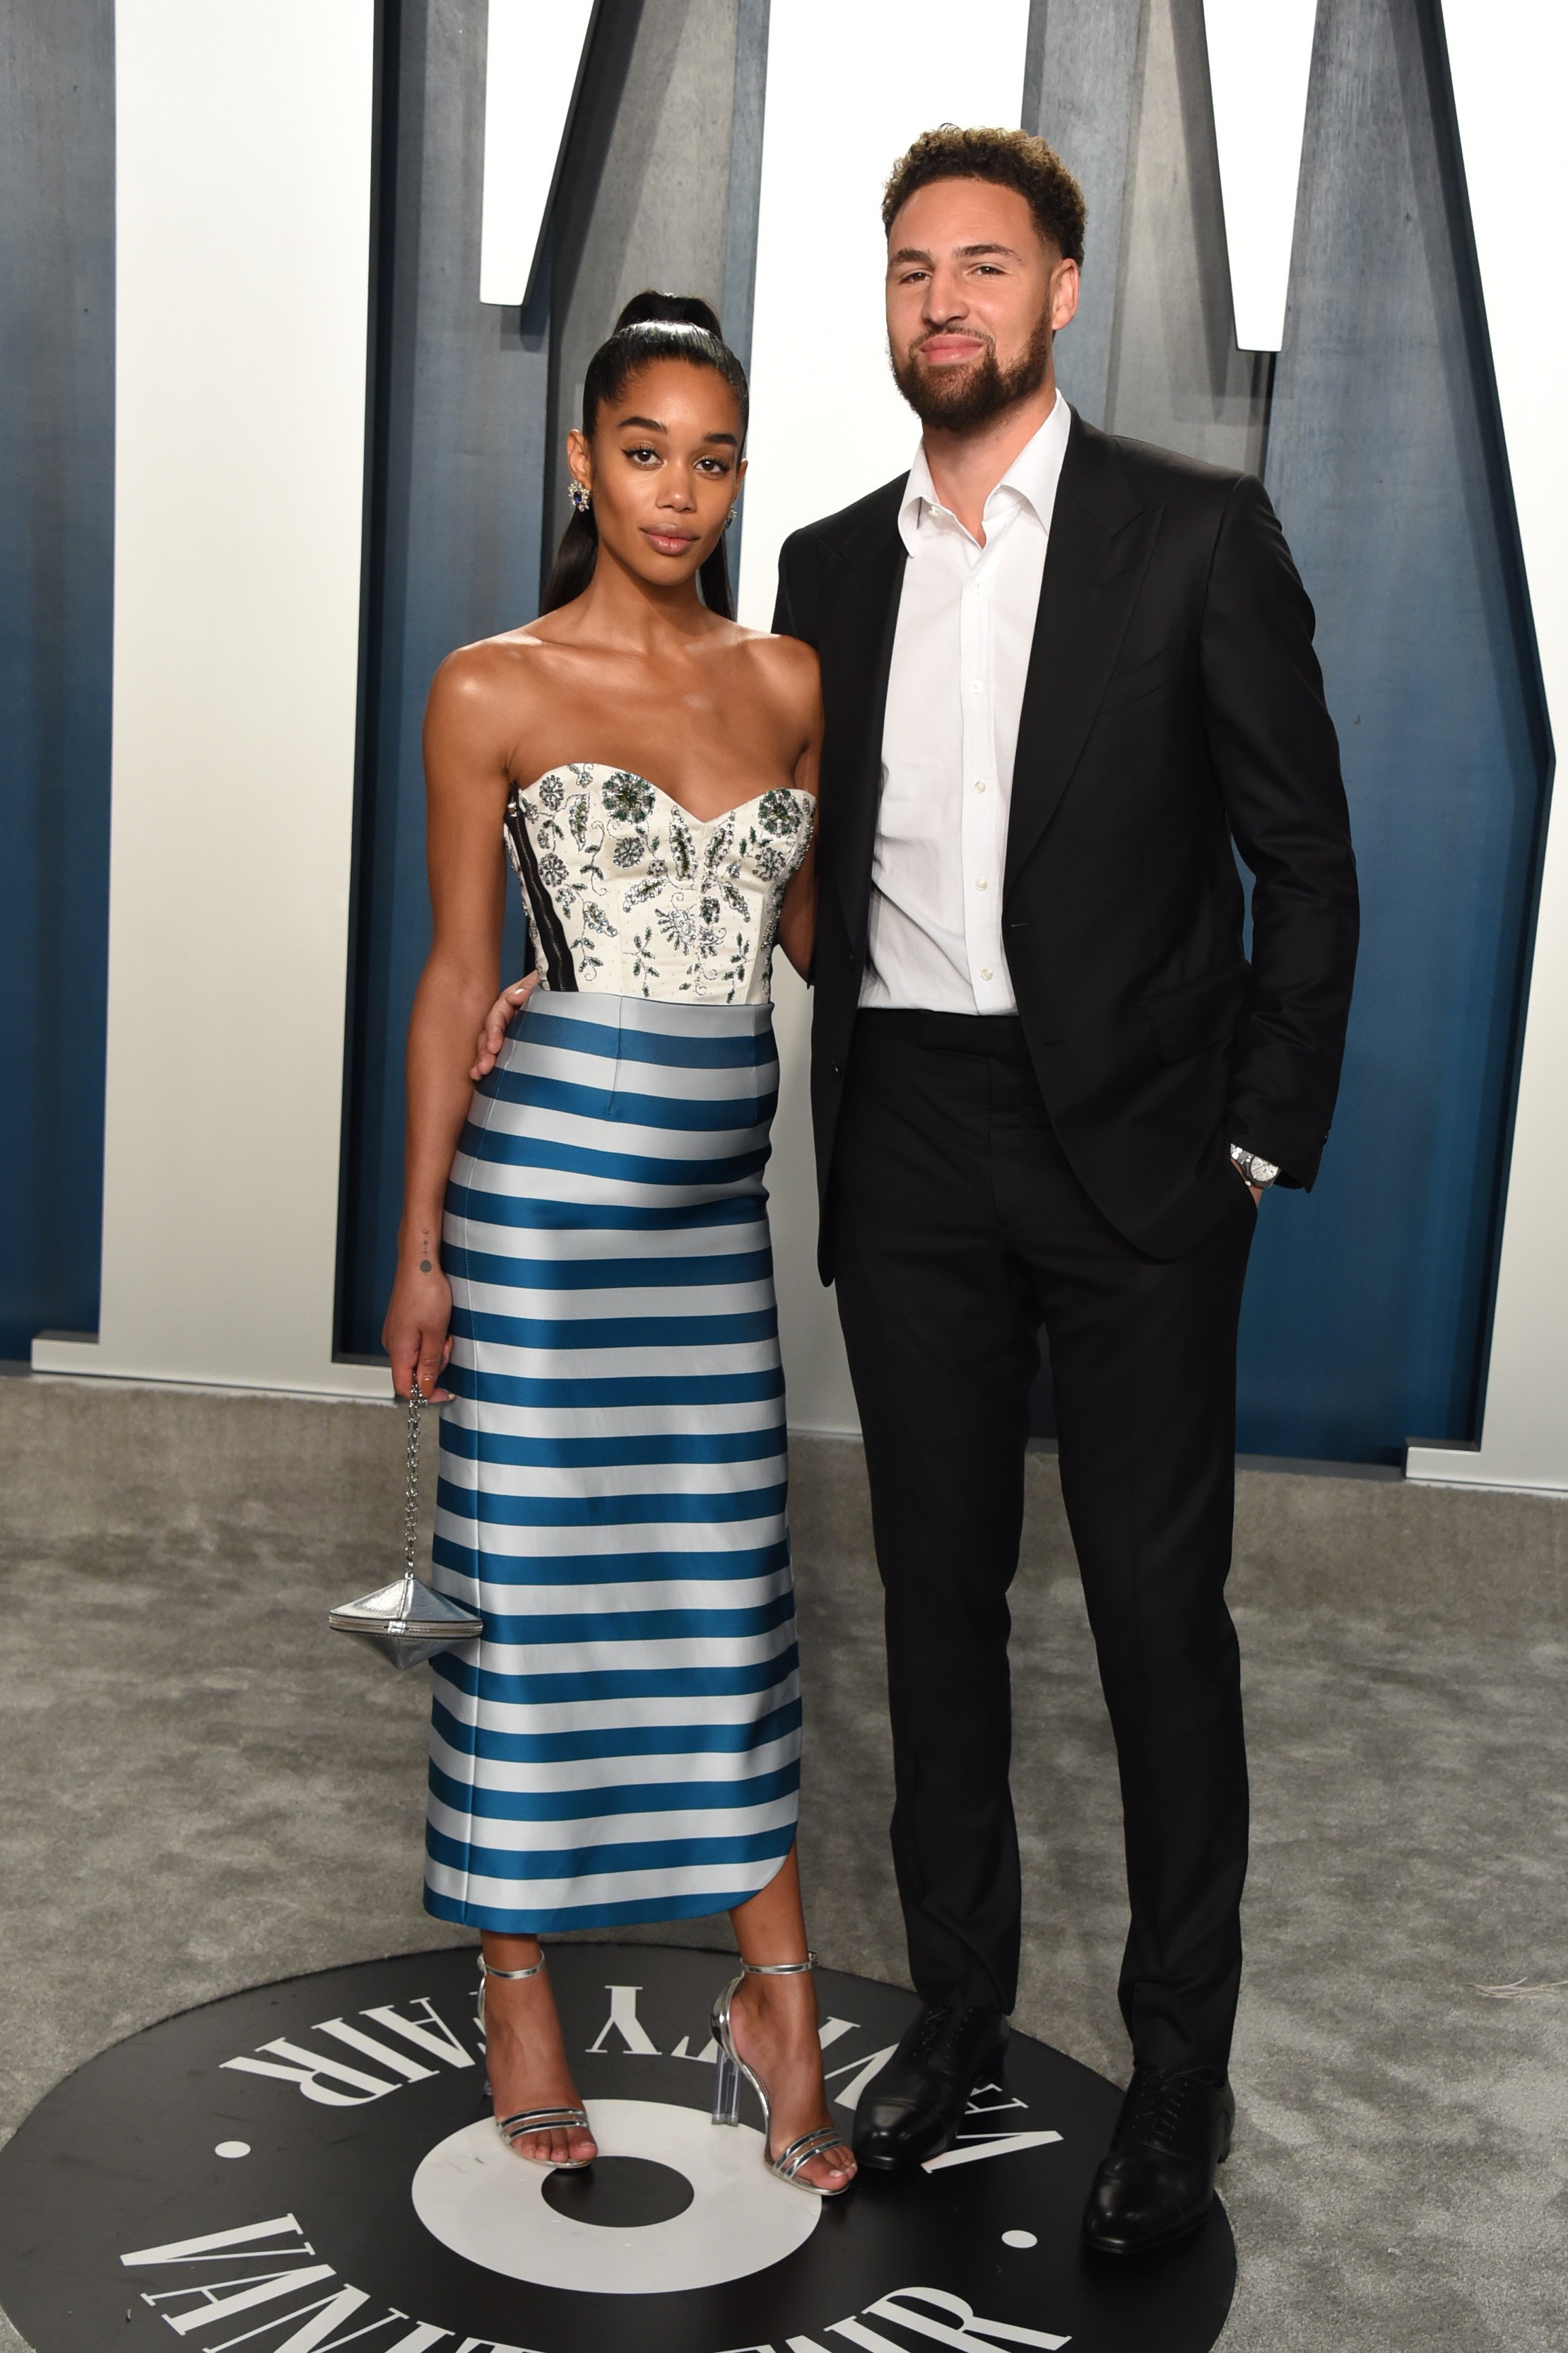  Laura Harrier and Klay Thompson arrive at the 2020 Vanity Fair Oscar Party at Wallis Annenberg Center for the Performing Arts in Beverly Hills, California on February 09, 2020 | Source: Getty Images